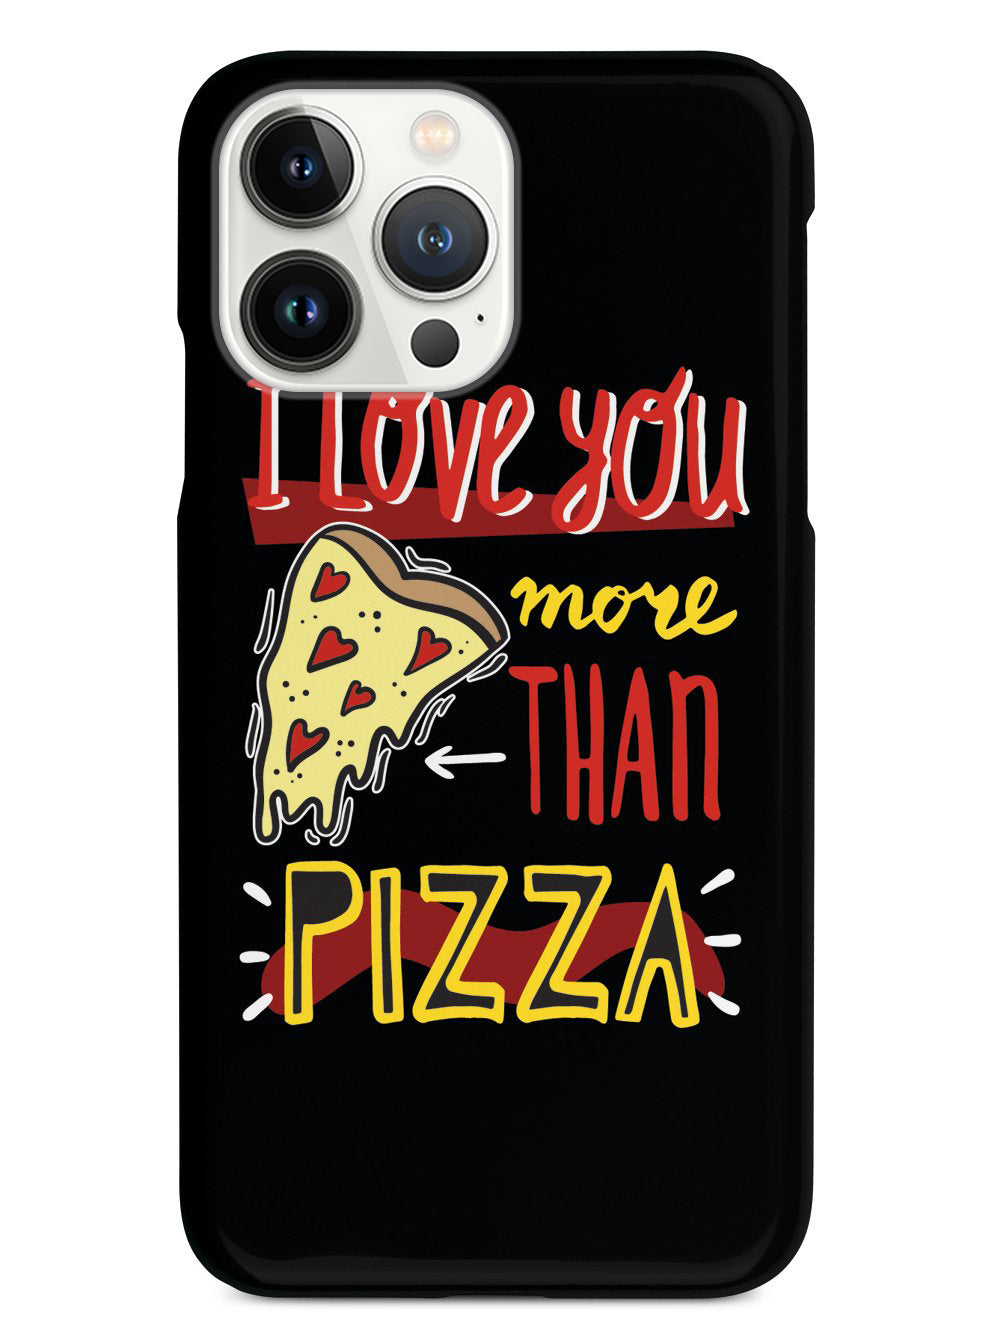 I Love You More Than Pizza - Black Case